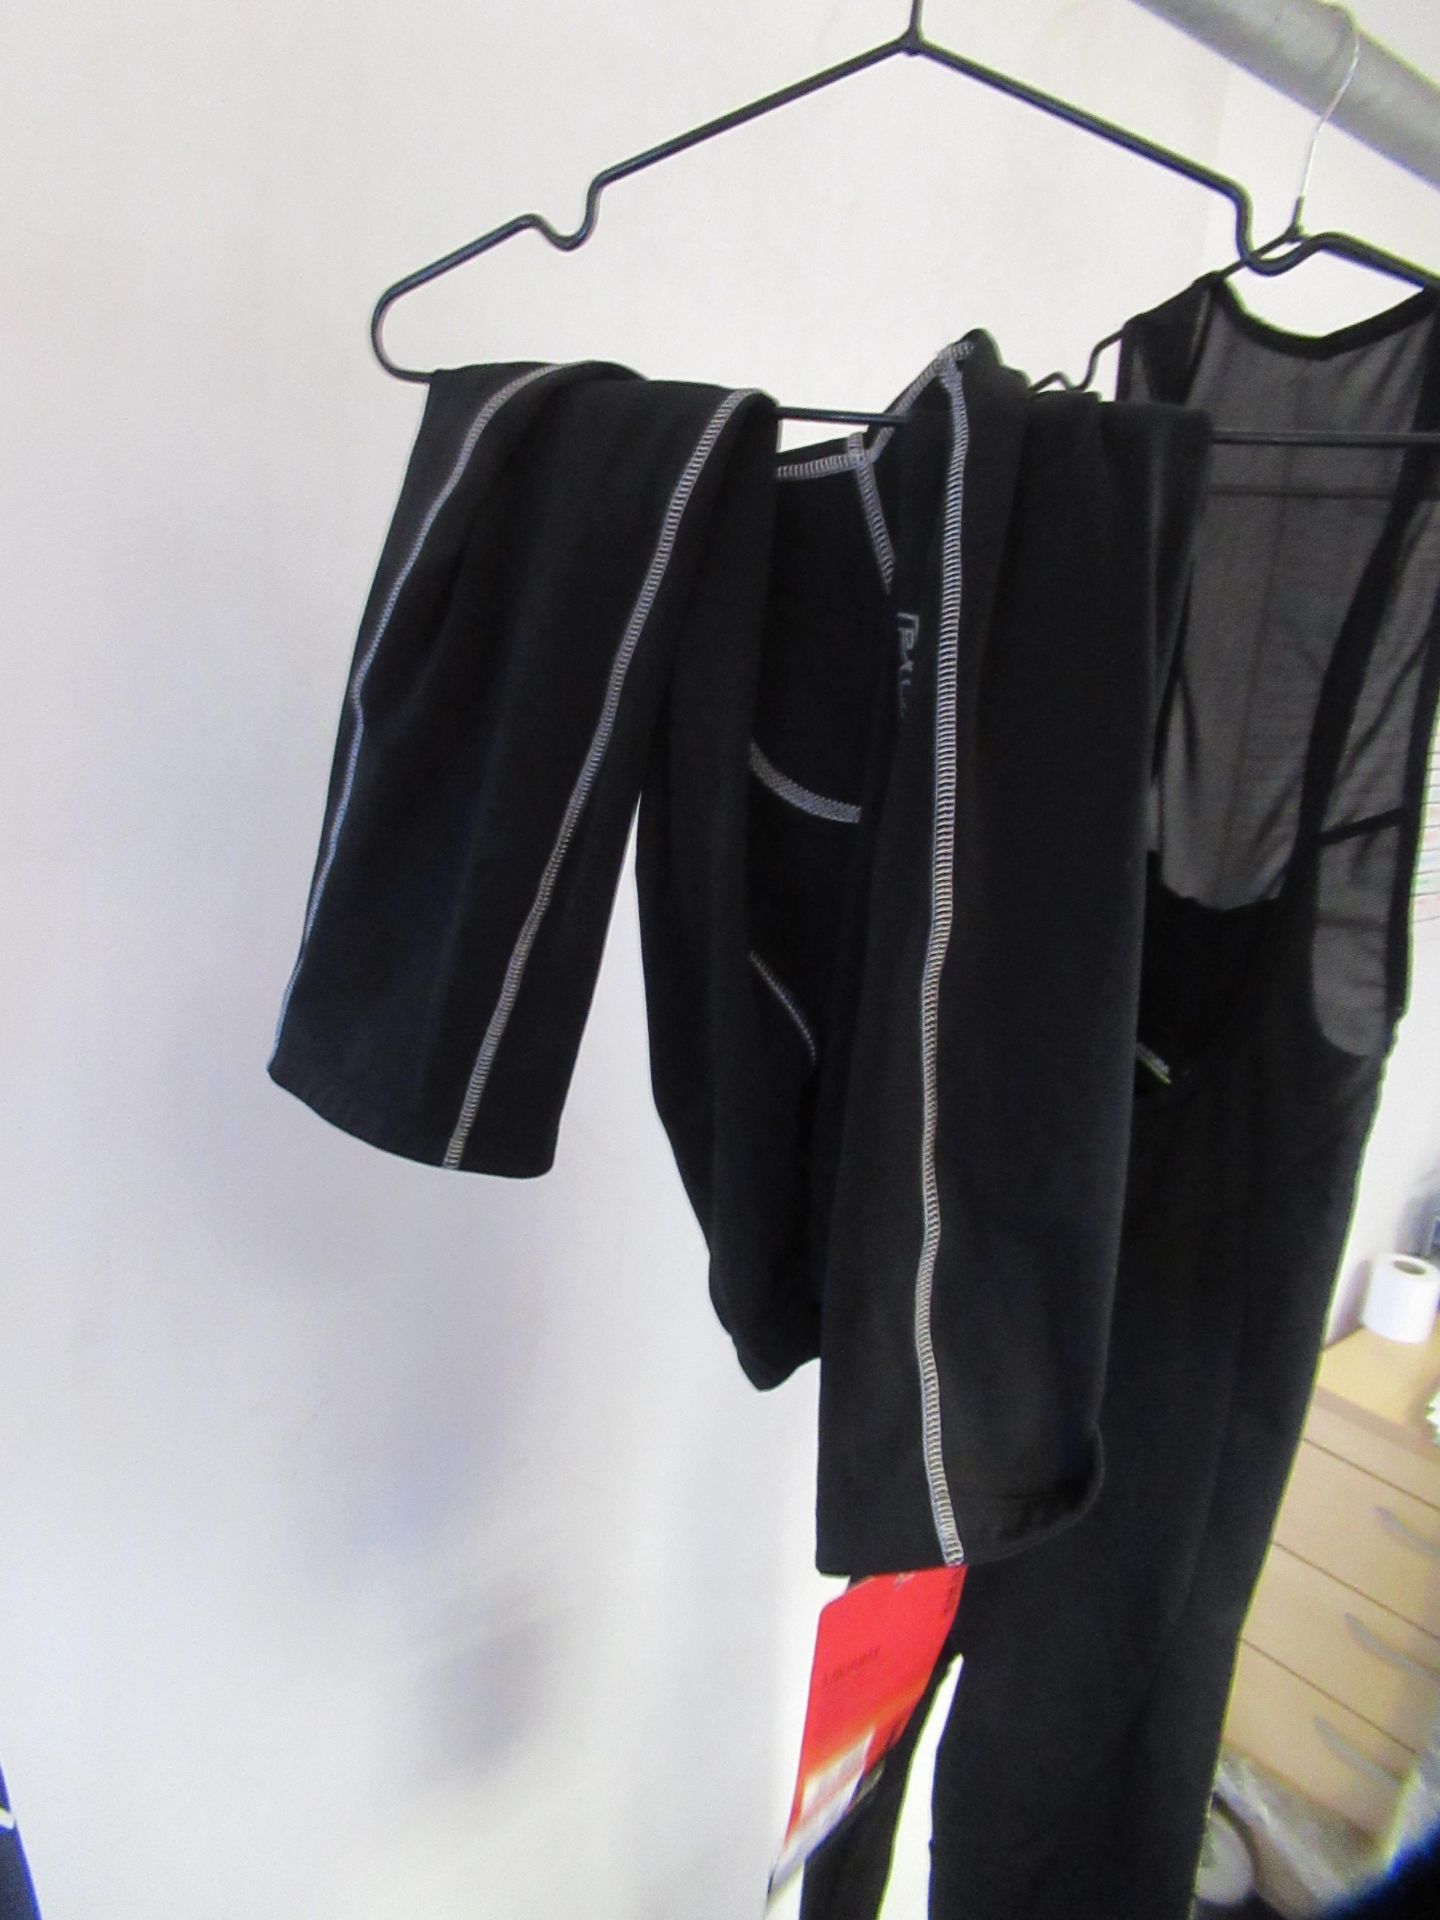 S Male Cycling Clothes - Image 3 of 4